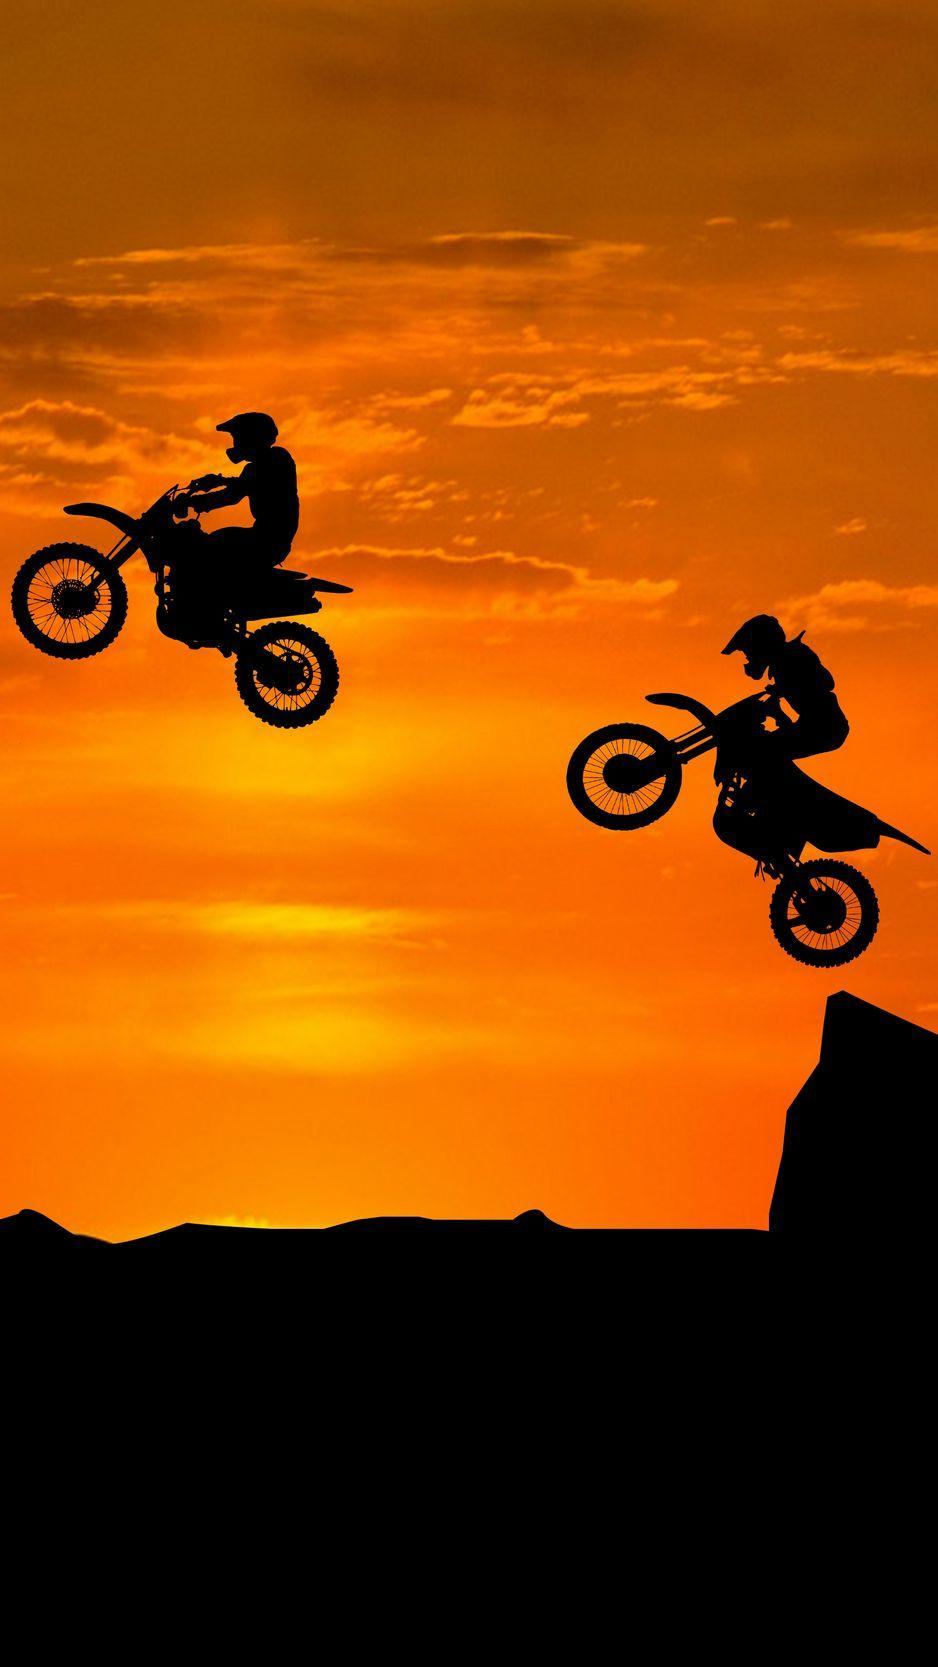 Wallpaper Motorcyclist Silhouettes Trick Hill